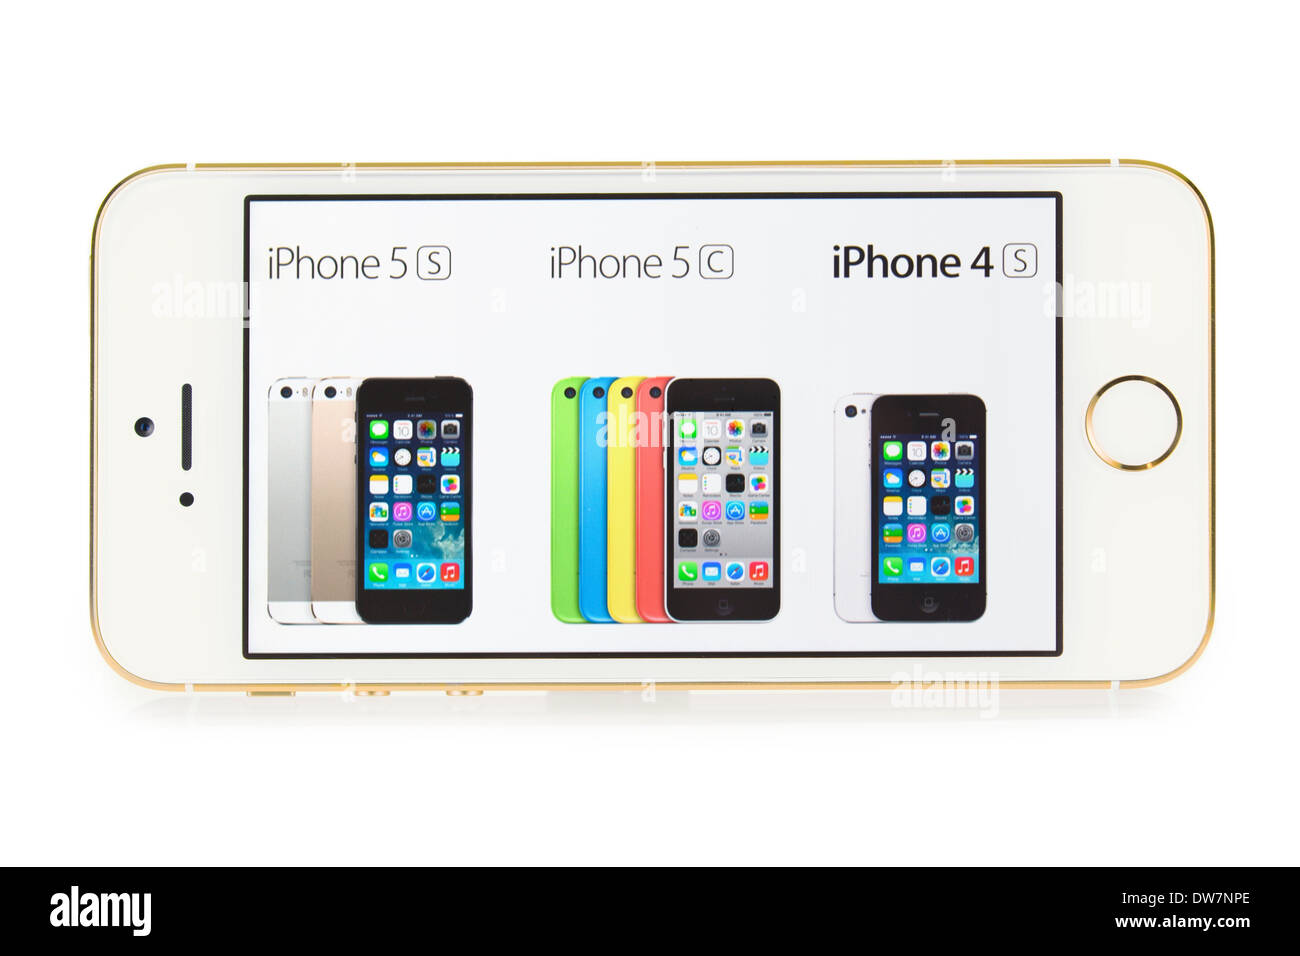 iPhone 5S, White Gold Champagne Color, with selection of iPhones 5S 5C and 4S on screen, iPhone 5 S Stock Photo